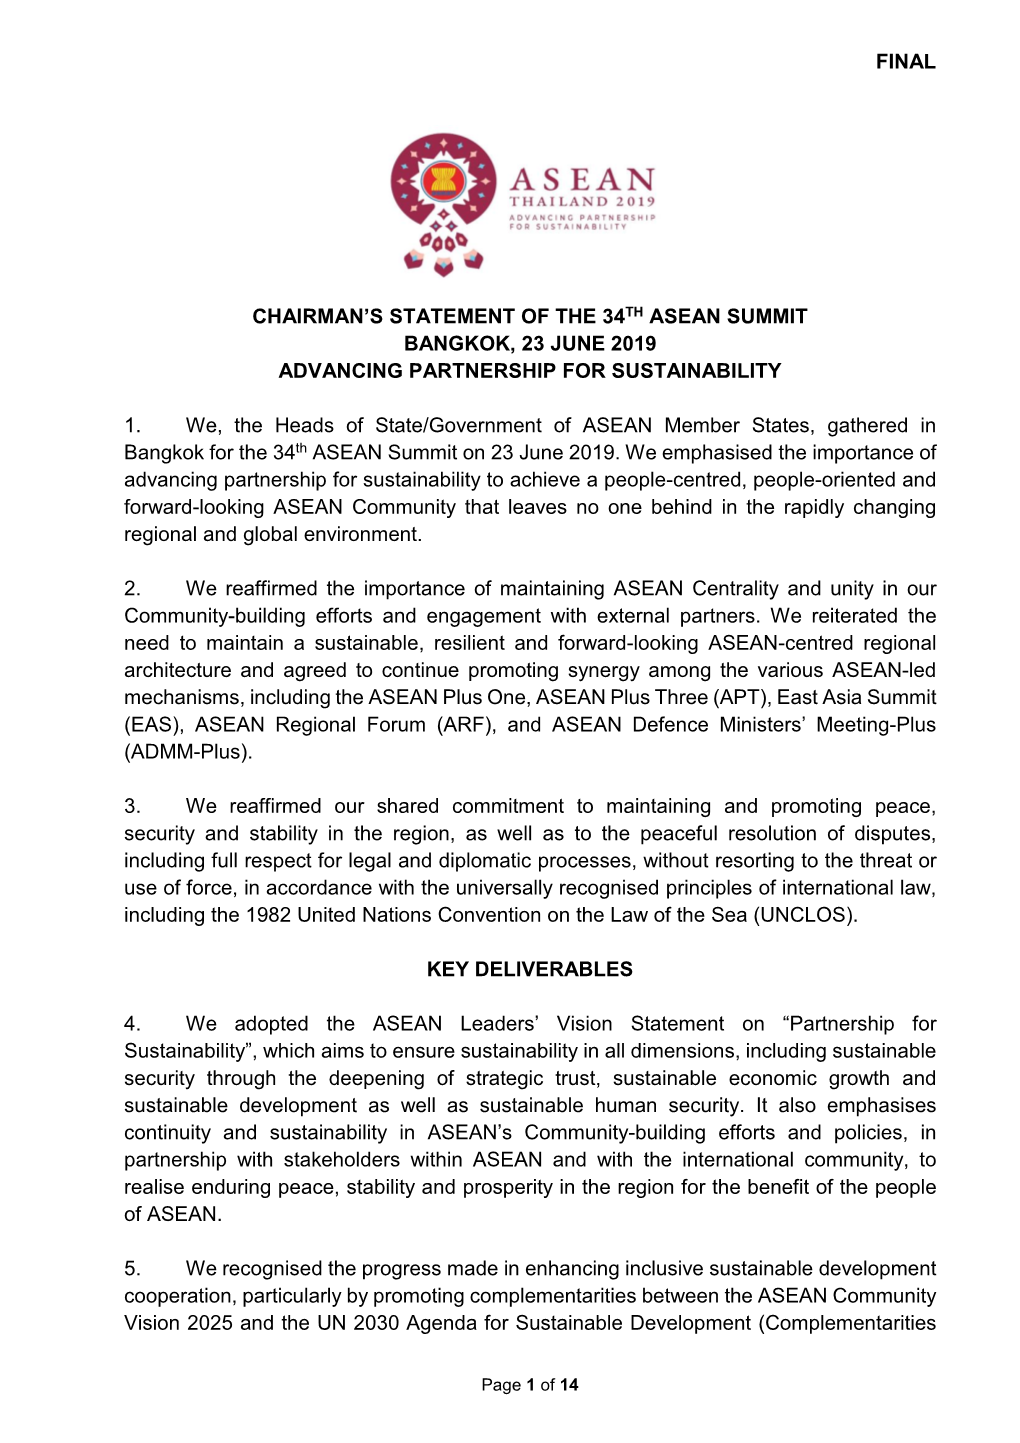 Final Chairman's Statement of the 34 Th Asean Summit